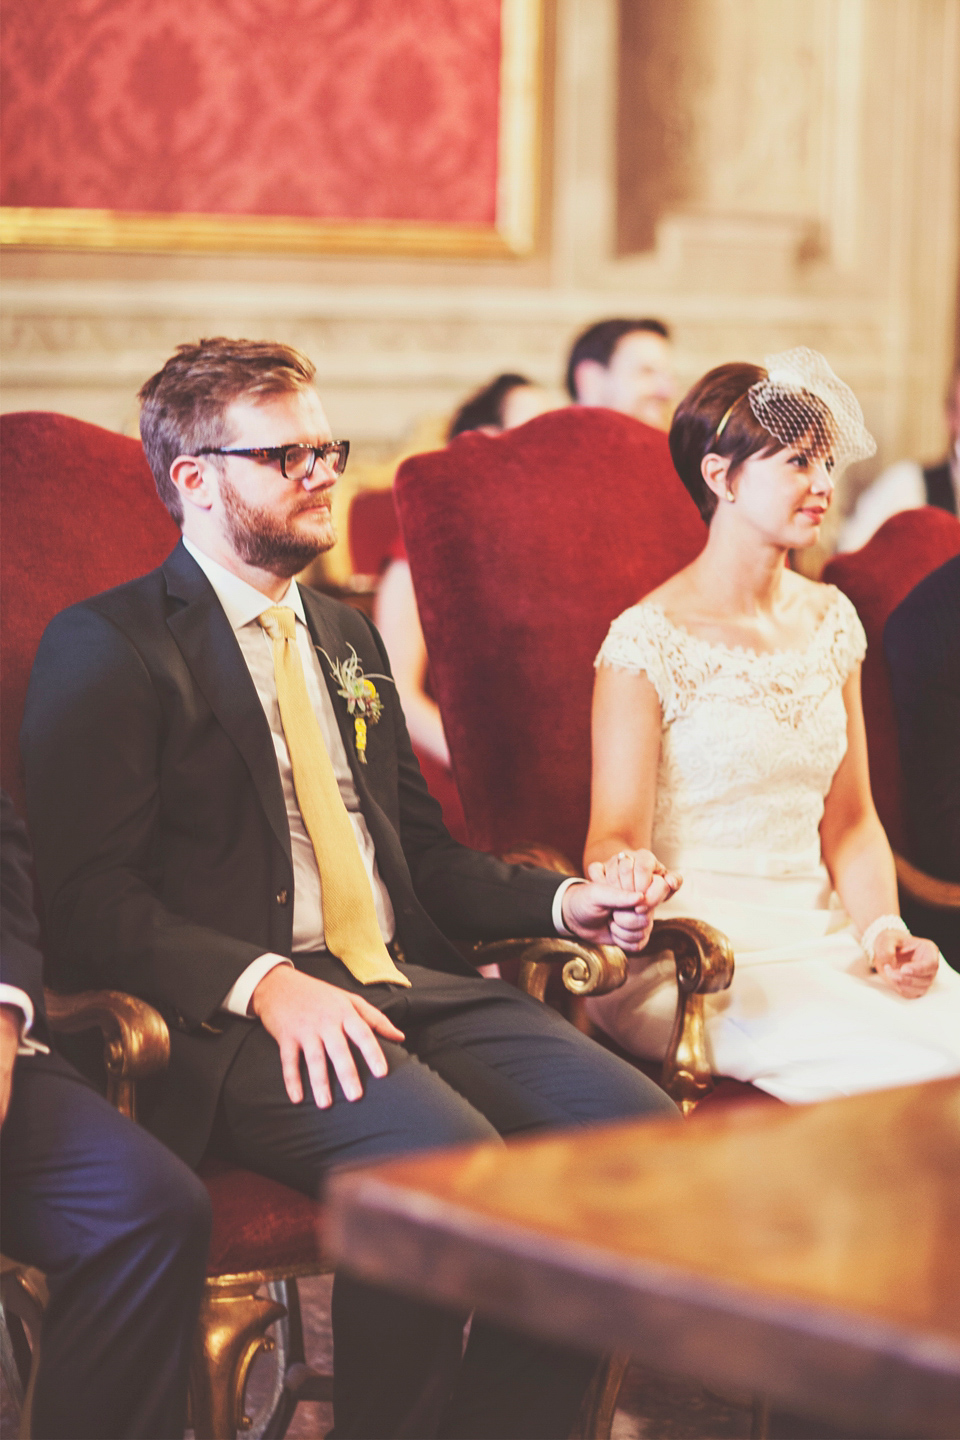 A 1960's and movie inspired, intimate Italian wedding. Images by On Love & Photography.